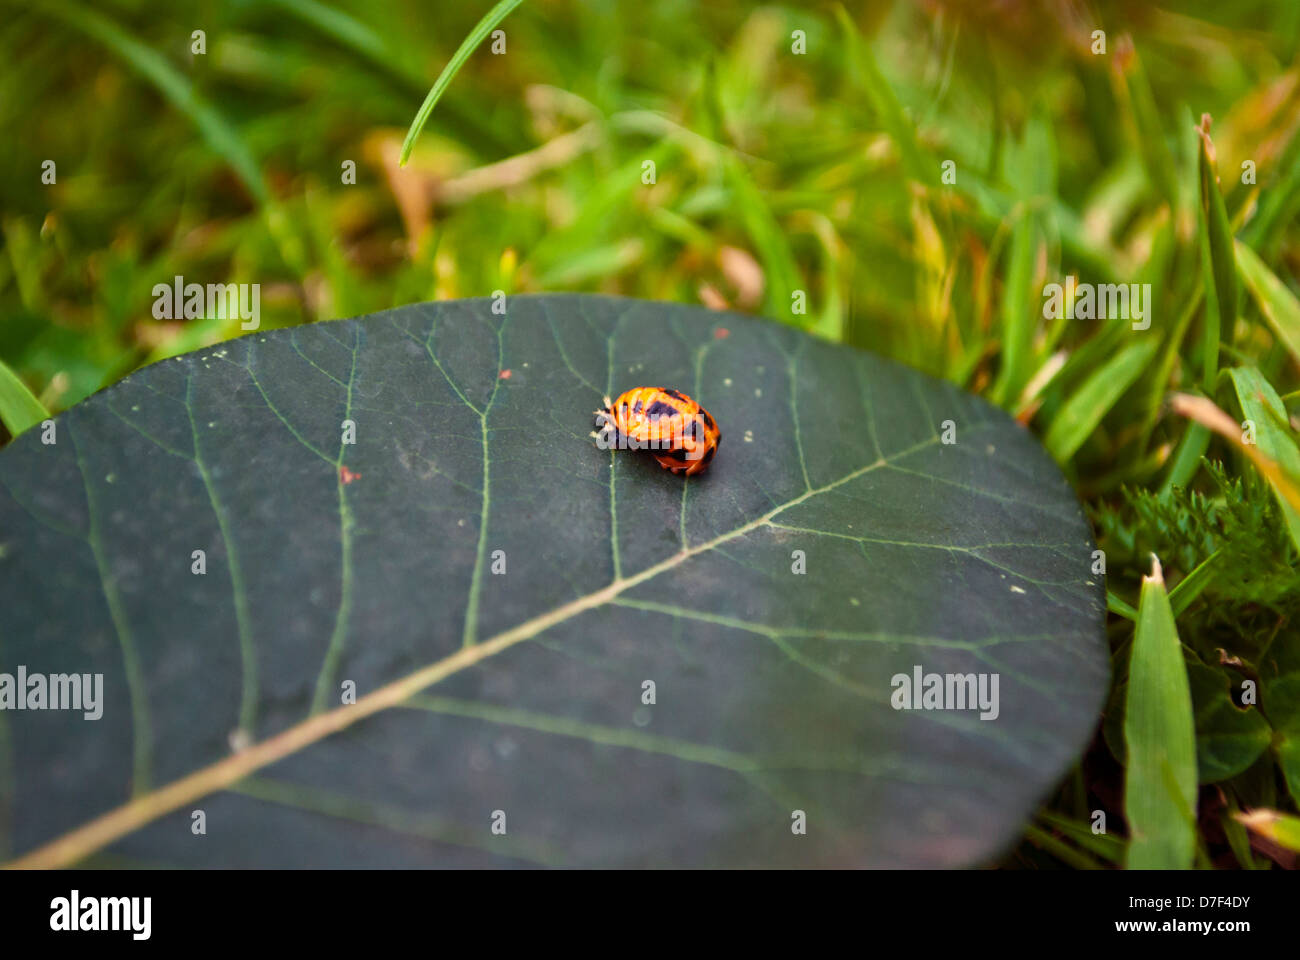 A close-up shot of a colourful bug on a leaf. Stock Photo